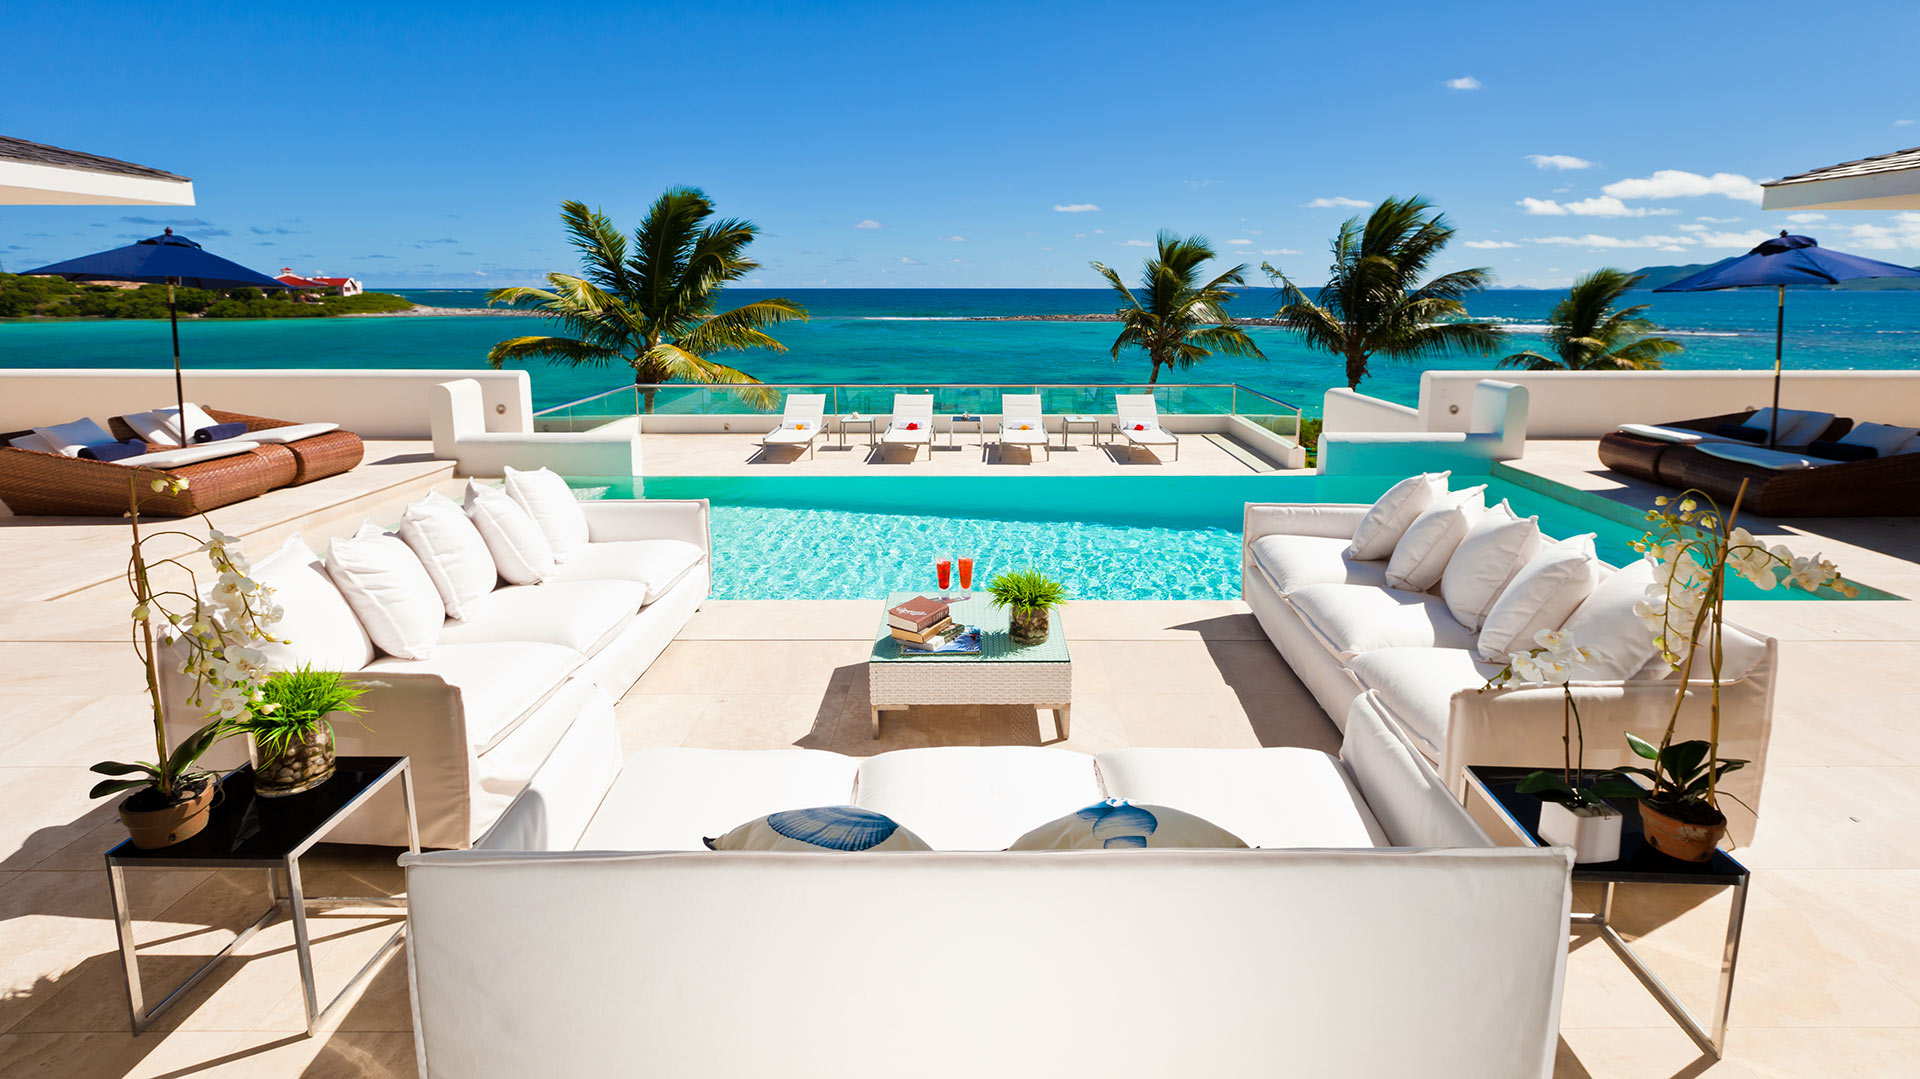 Your seat awaits you at Le Bleu Villa — book this gorgeous villa rental today for the ultimate vacation on Anguilla.
